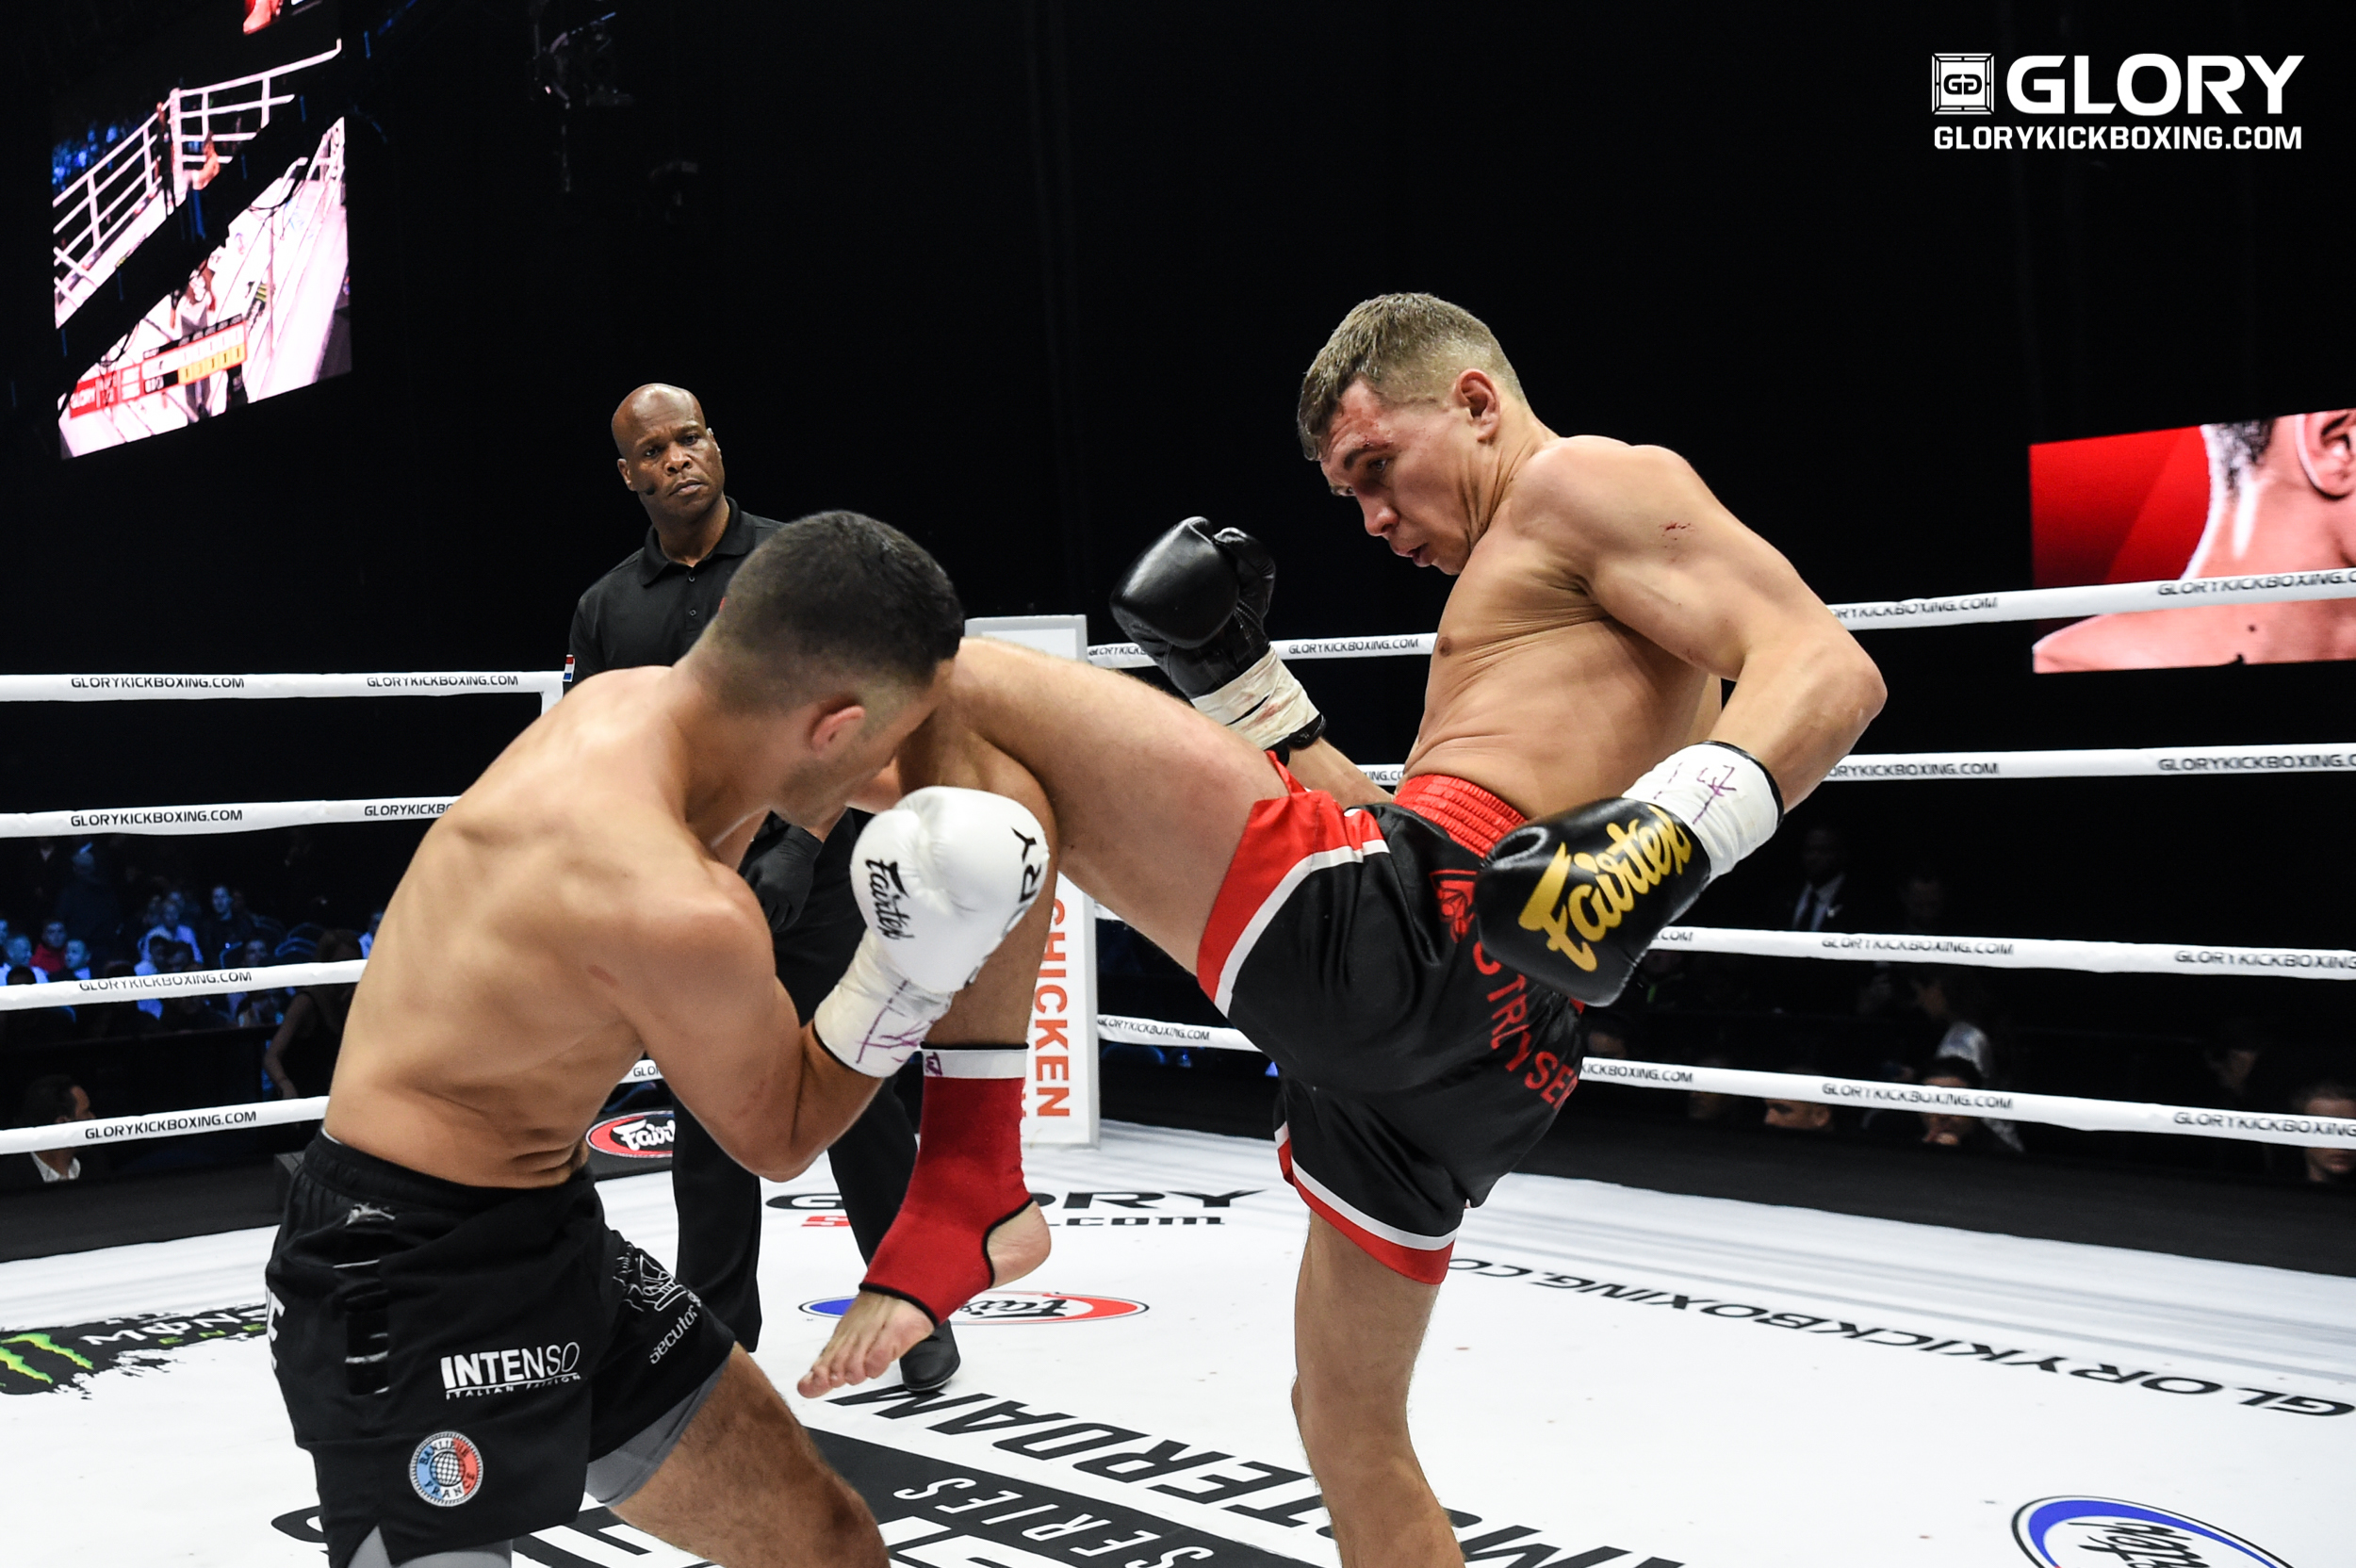 Ulianov outworks Zouggary, captures decision win